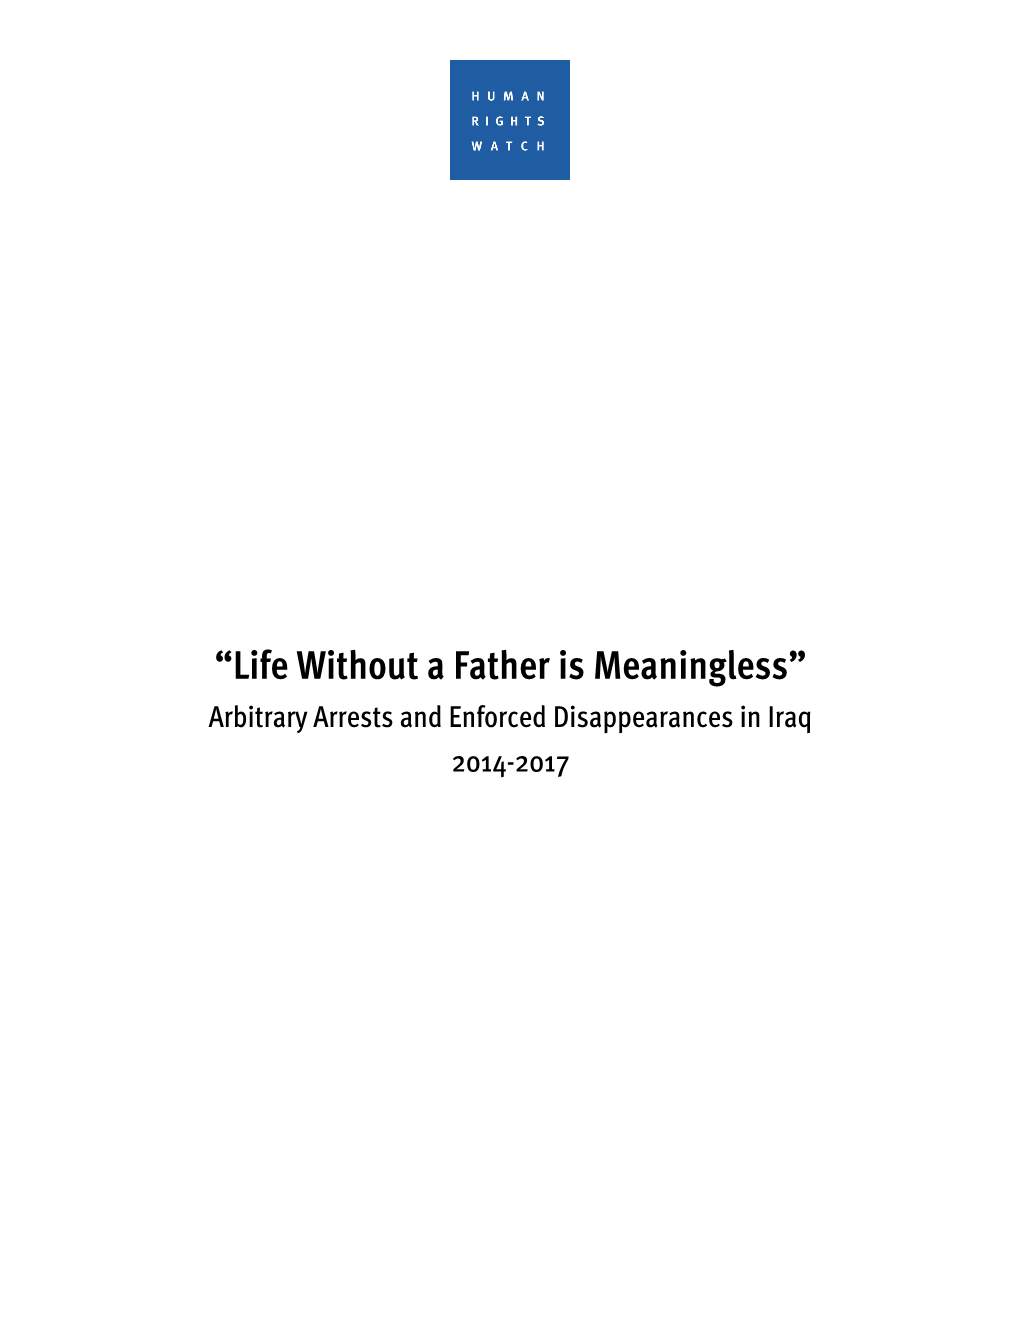 “Life Without a Father Is Meaningless” Arbitrary Arrests and Enforced Disappearances in Iraq 2014-2017